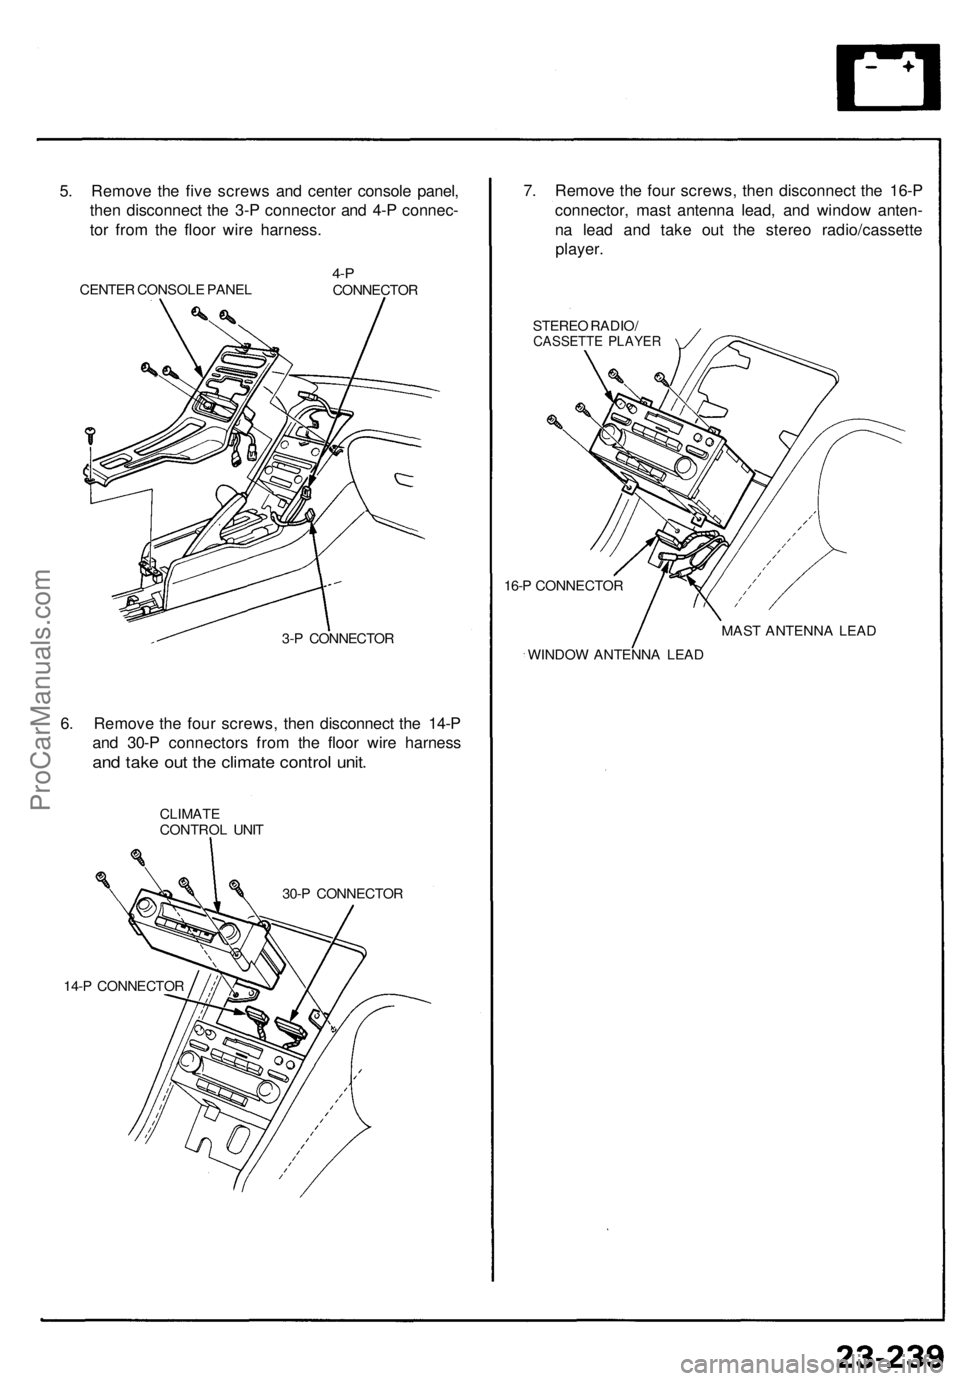 ACURA NSX 1991  Service Repair Manual 
5. Remove the five screws and center console panel,

then disconnect the 3-P connector and 4-P connec-

tor from the floor wire harness.

CENTER CONSOLE PANEL 
4-P

CONNECTOR

3-P CONNECTOR

6. Remov